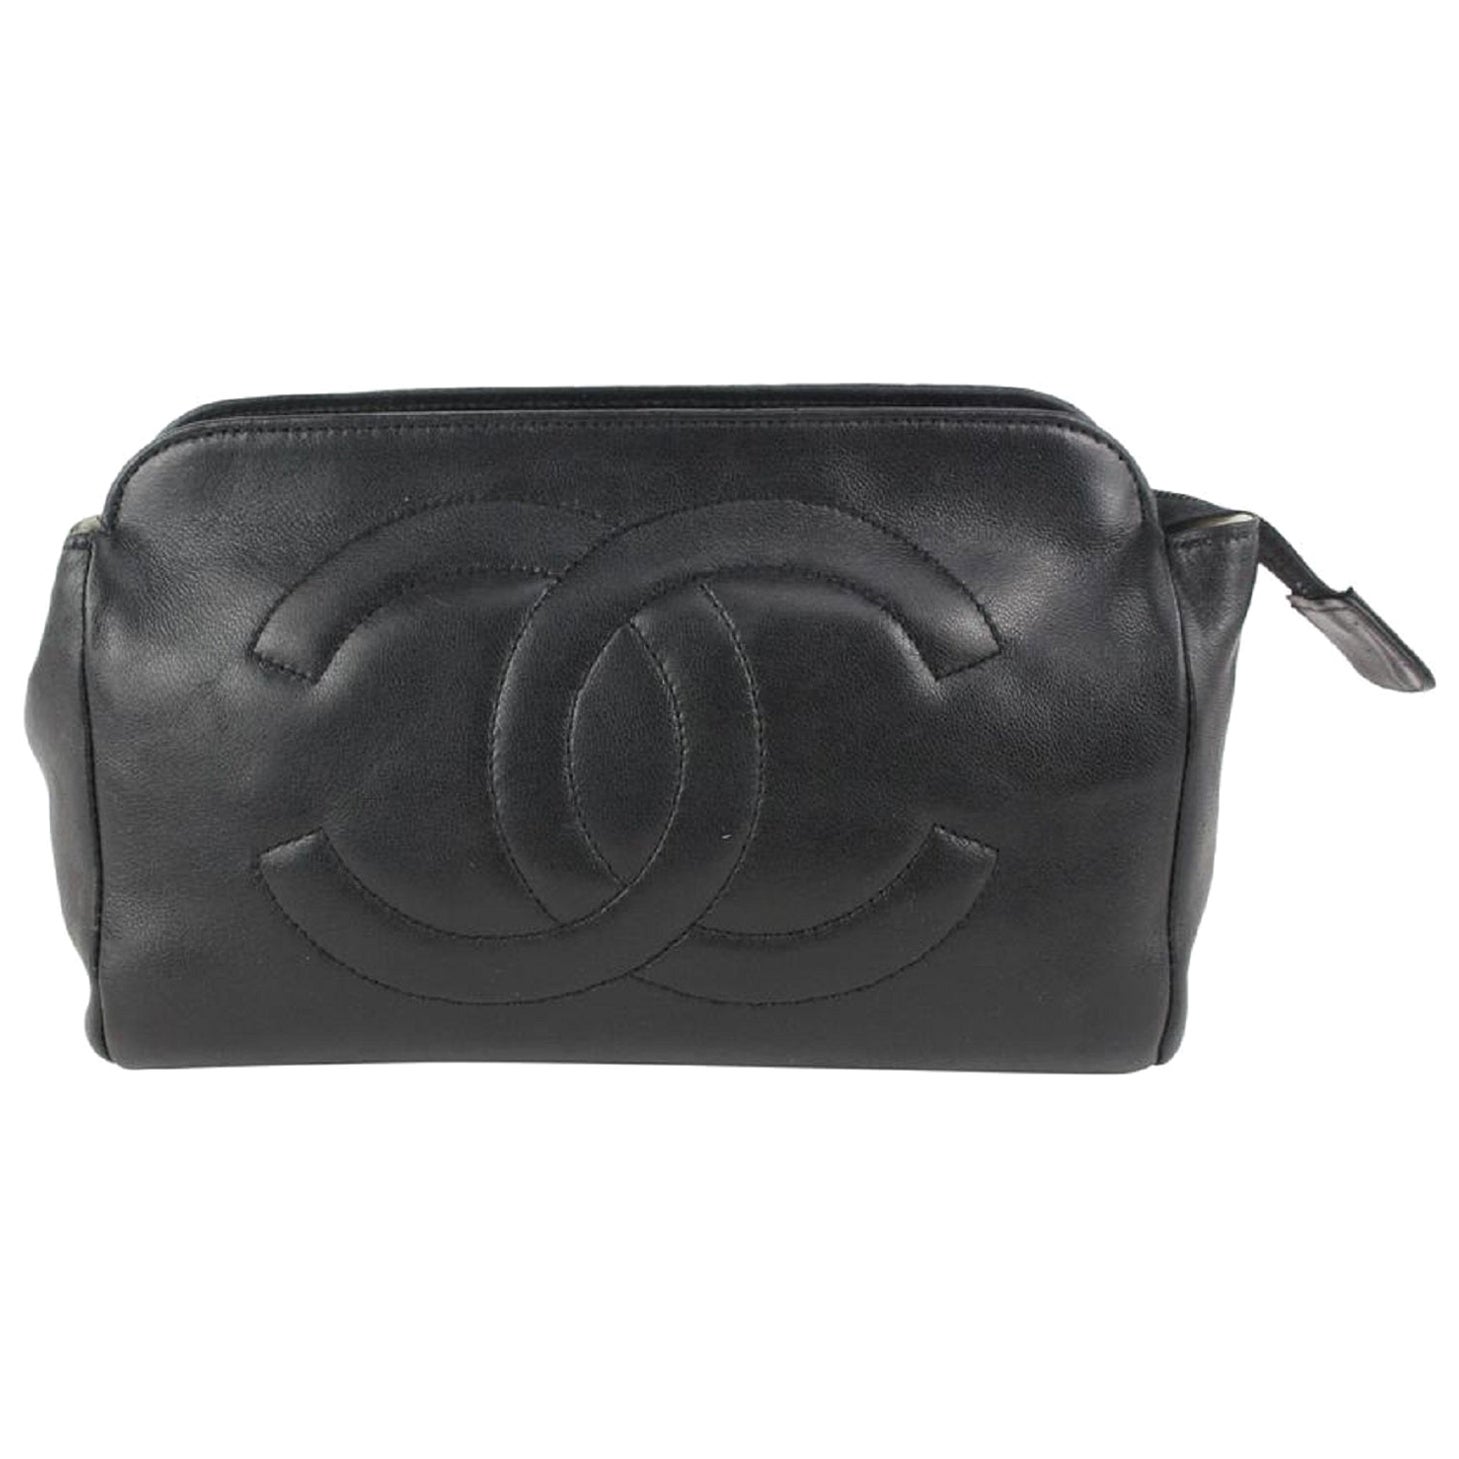 Chanel Black Lambskin Timeless CC Logo Cosmetic Pouch Make Up Toiletry 108c17